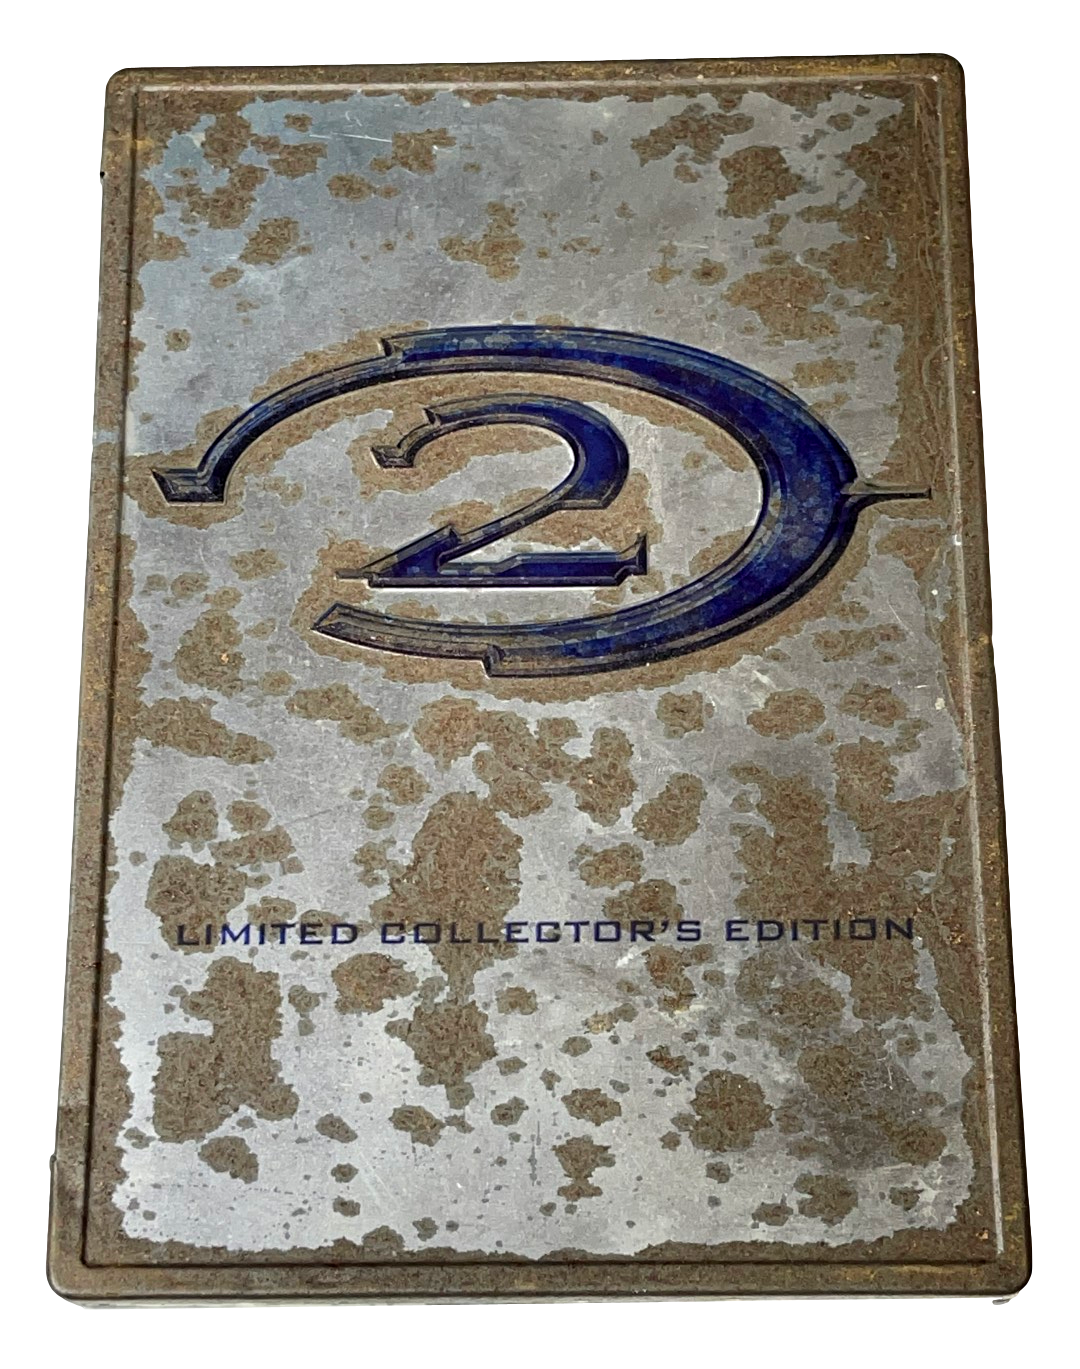 Game | Microsoft XBOX | Halo 2 Limited Collector's Edition Steel Book